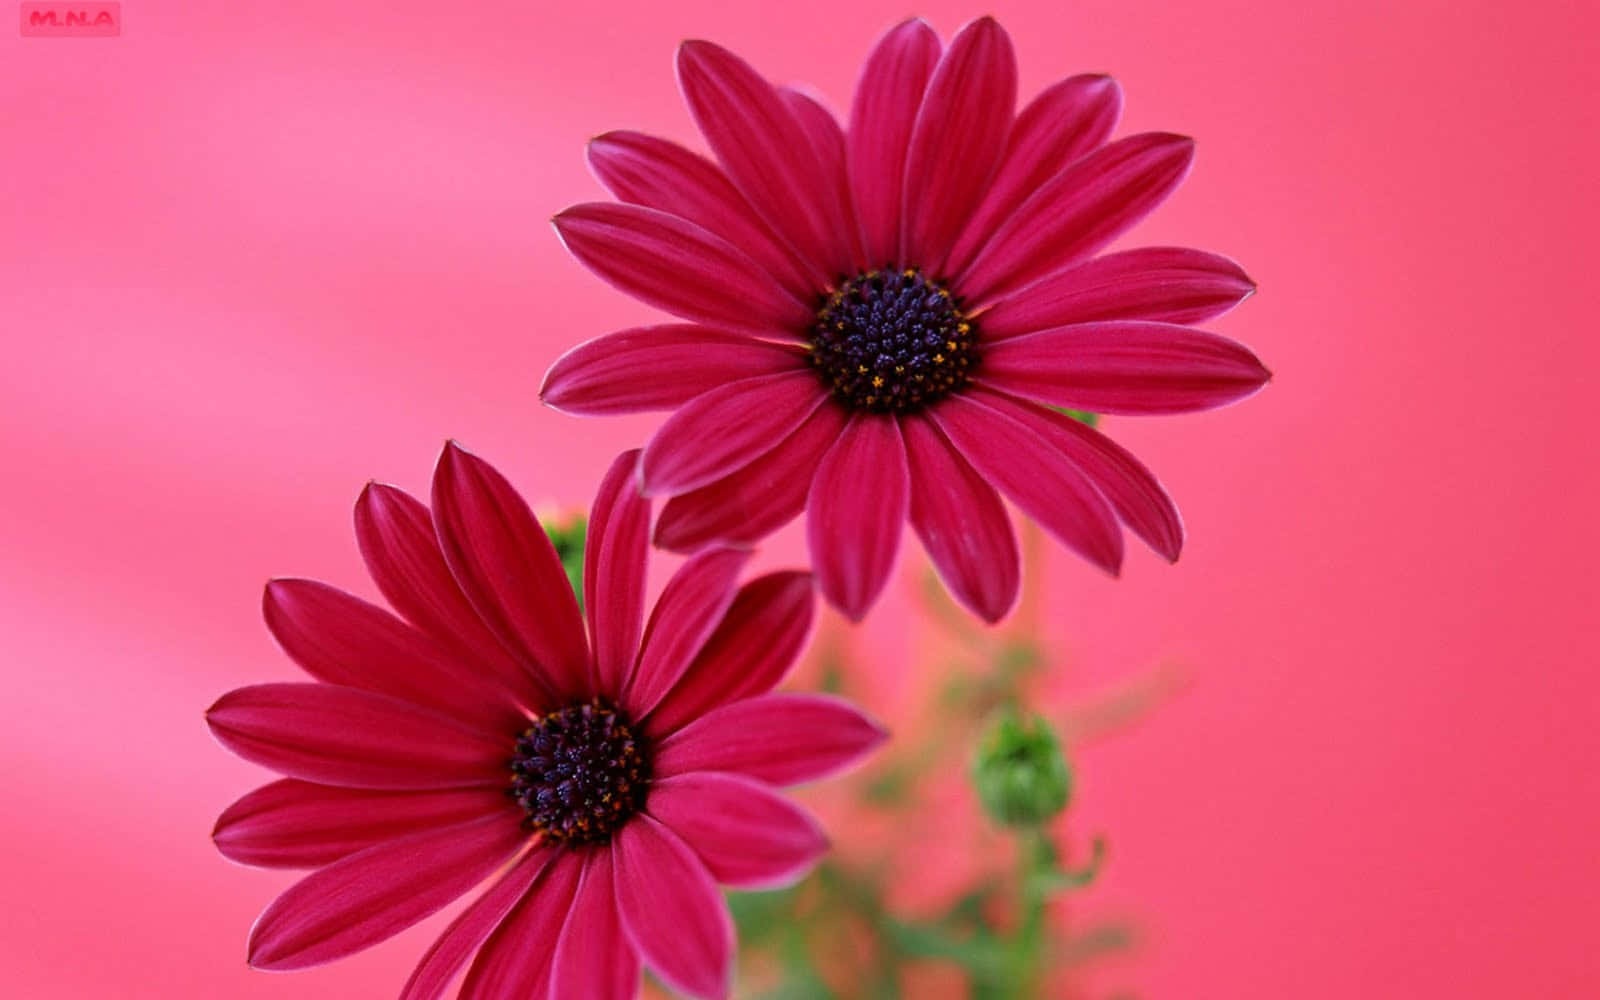 Two Nature Flower Wallpaper